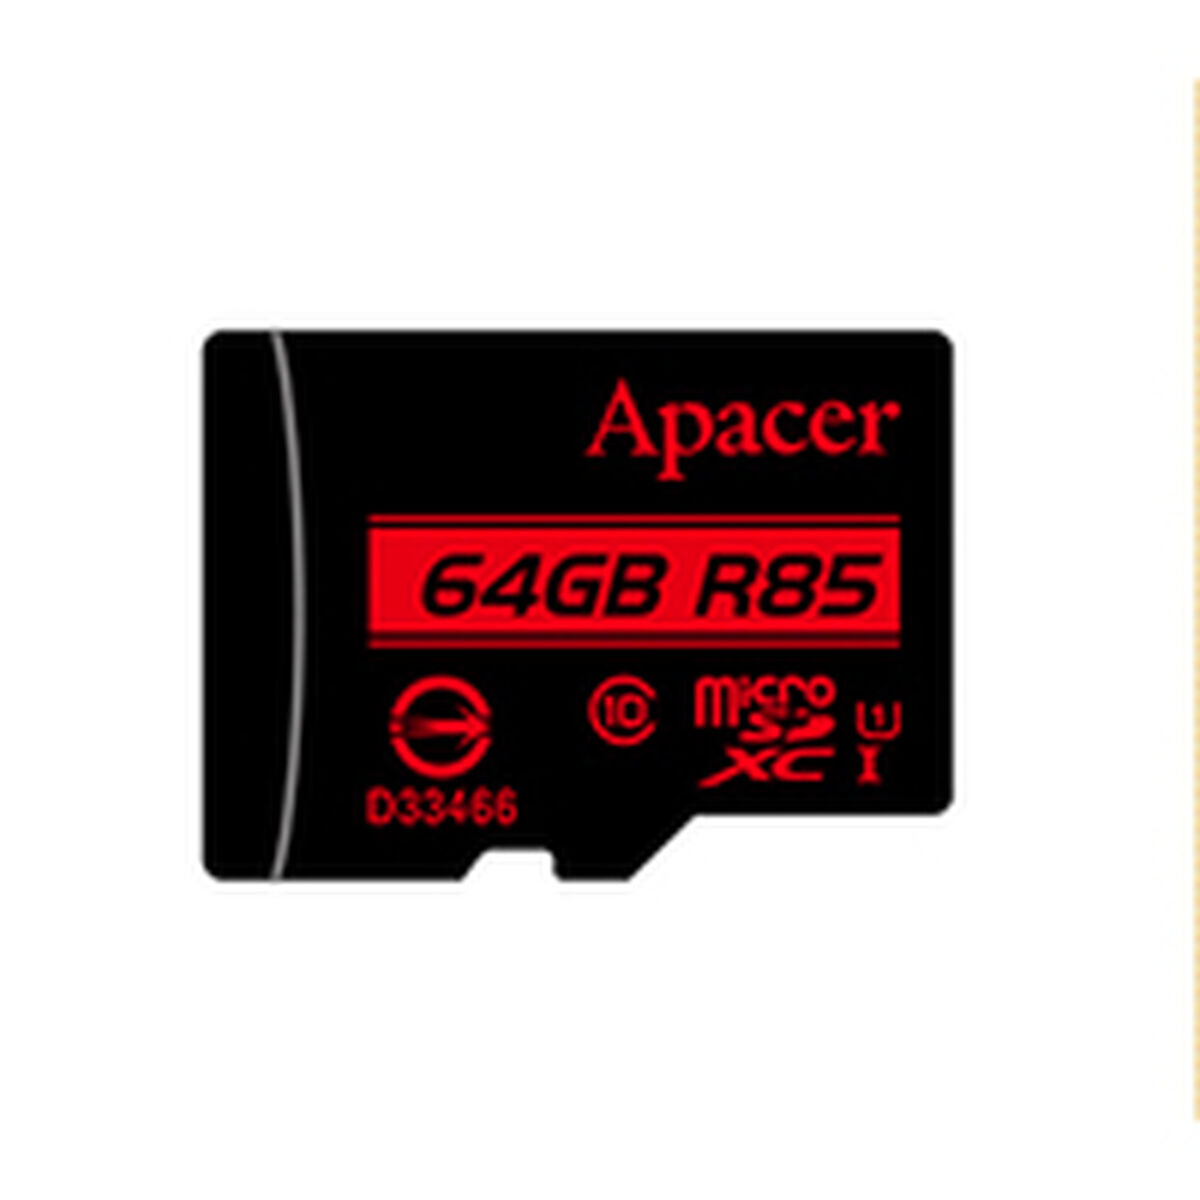 SD Memory Card Apacer AP64GMCSX10U5-R 64 GB, Apacer, Computing, Data storage, sd-memory-card-apacer-ap64gmcsx10u5-r-64-gb, Brand_Apacer, category-reference-2609, category-reference-2803, category-reference-2813, category-reference-t-19685, category-reference-t-19909, category-reference-t-21355, category-reference-t-25632, category-reference-t-29824, computers / components, Condition_NEW, Price_20 - 50, Teleworking, RiotNook